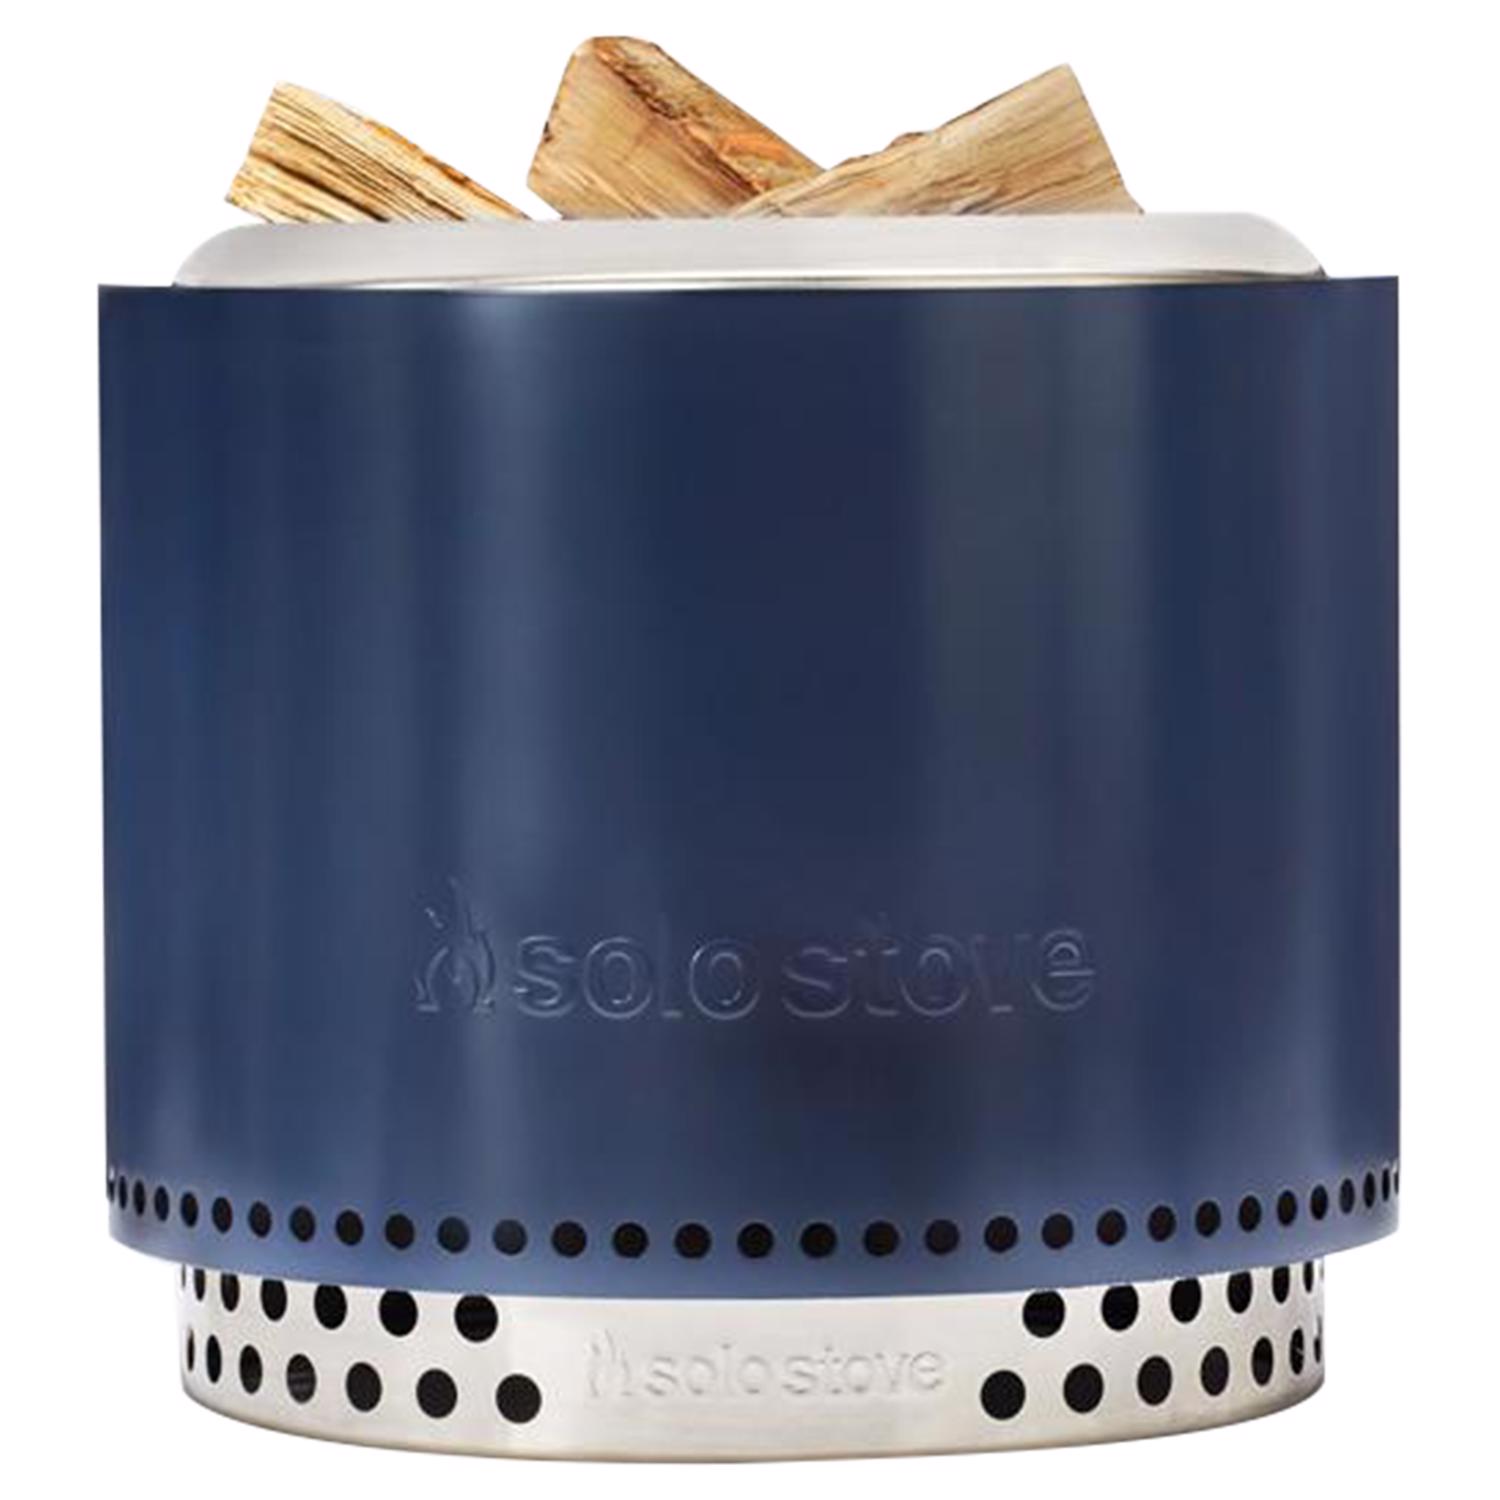 Photos - Other Garden Equipment AL-KO Solo Stove Bonfire 2.0 + Stand & Shelter 19.5 in. W Stainless Steel Round 